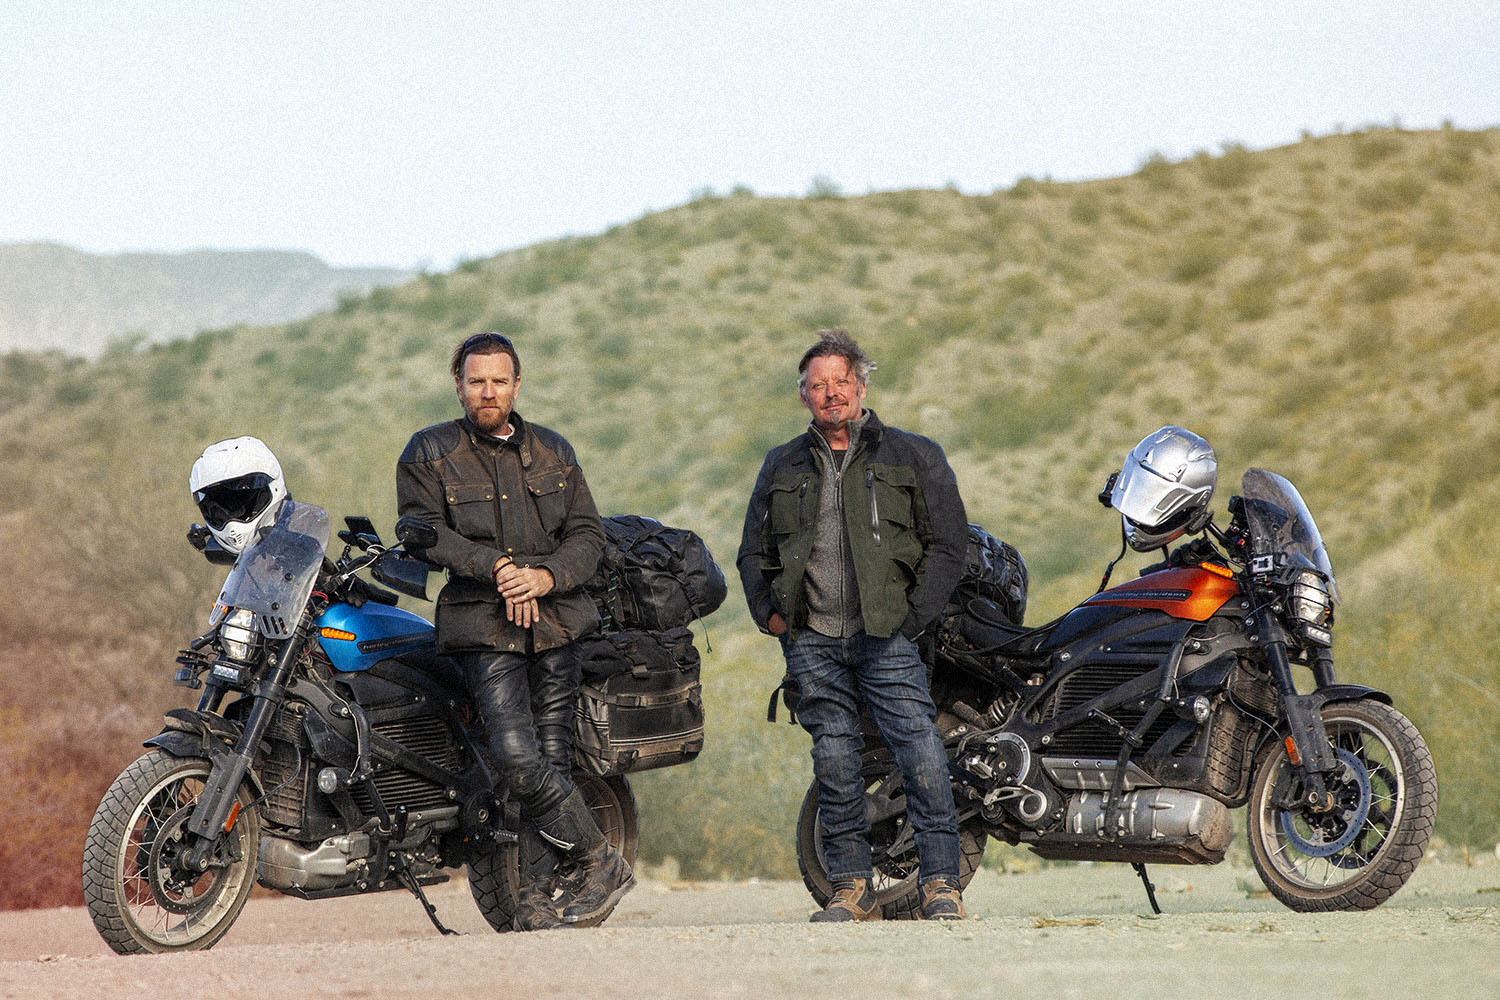 Ewan McGregor and Charley Boorman next to electric Harley-Davidson LiveWire motorcycles in "Long Way Up"